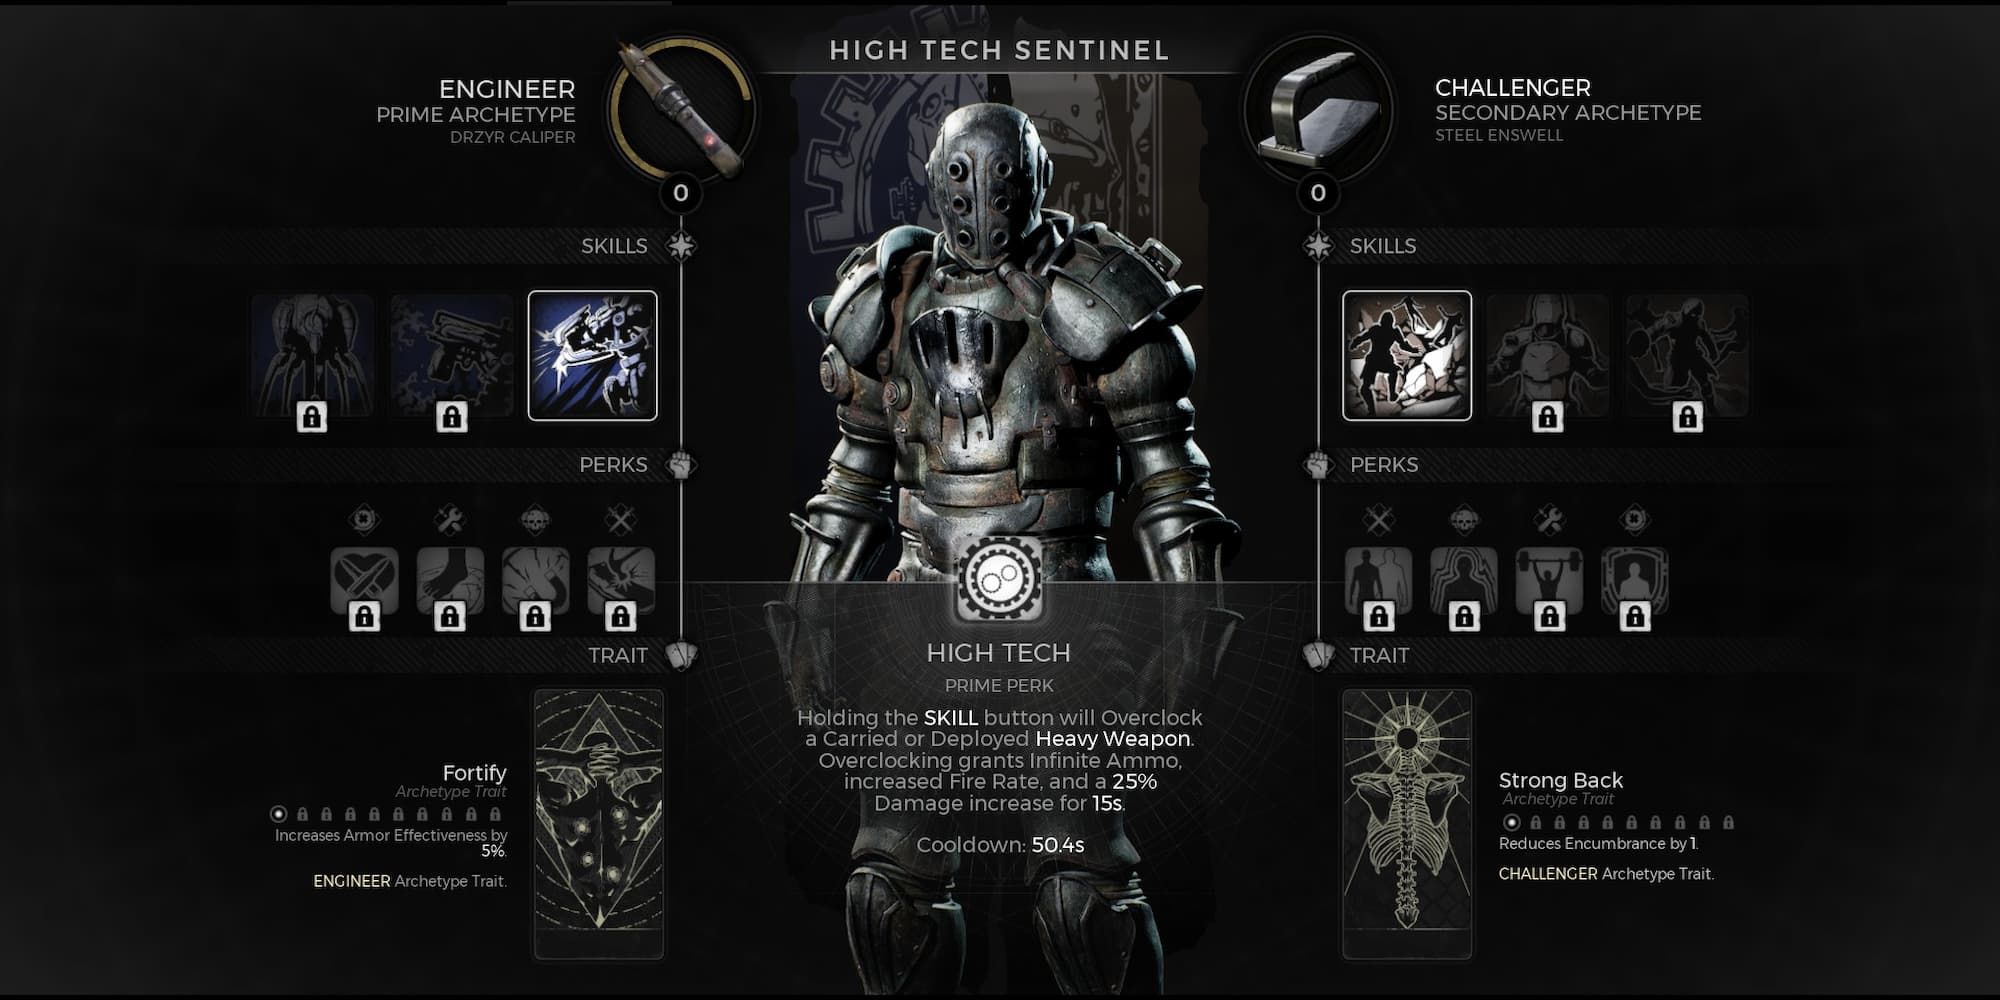 The High Tech Sentinel in Remnant 2